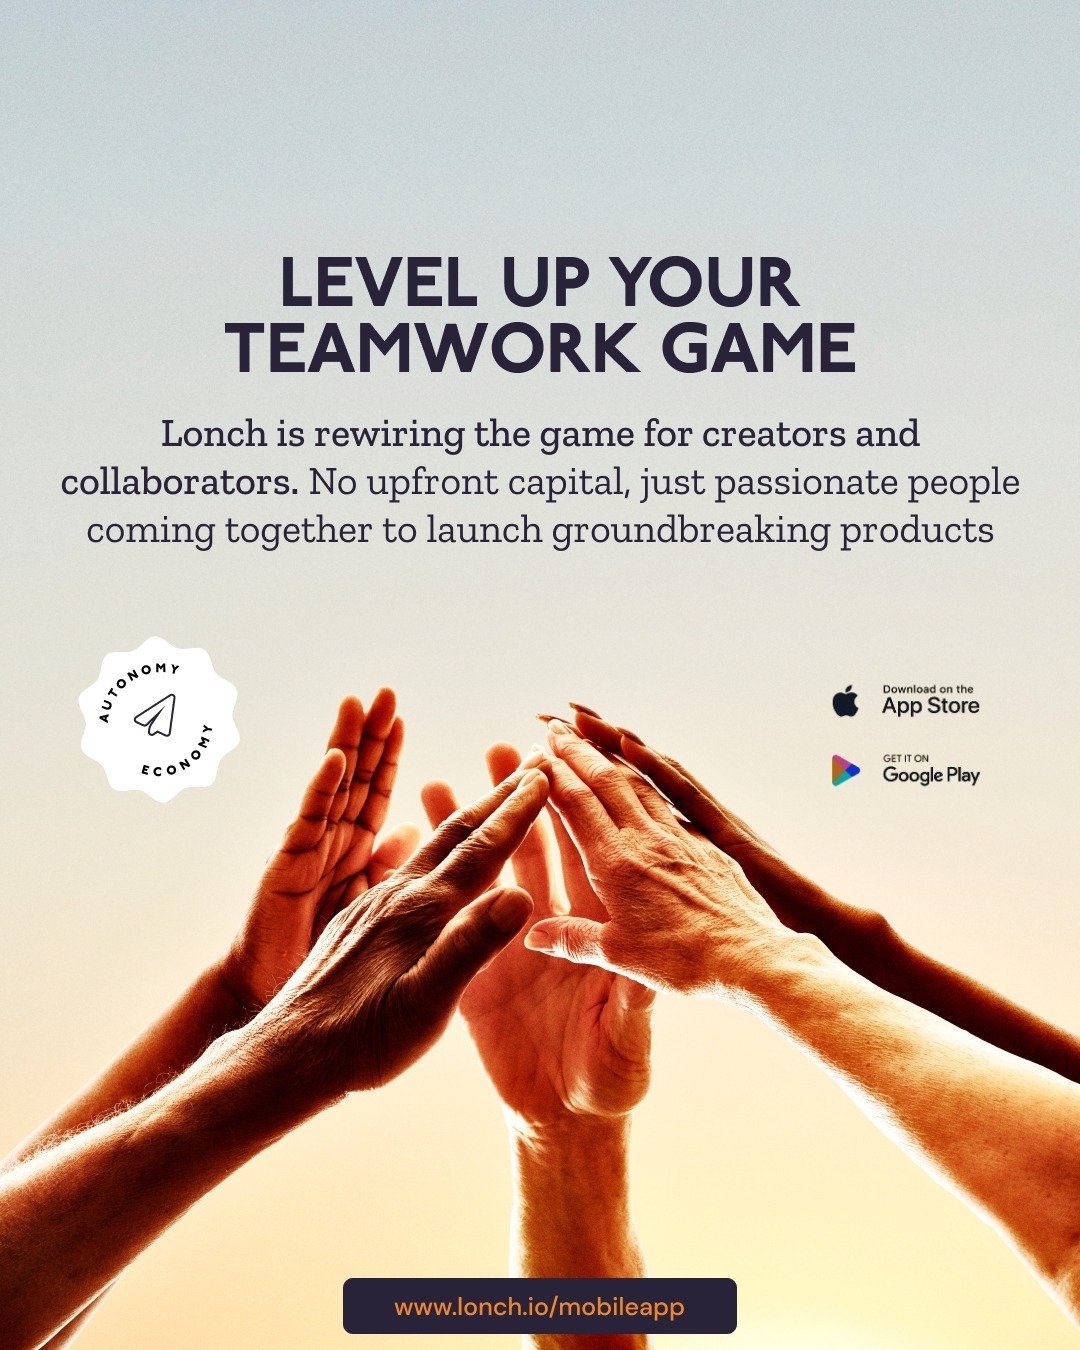 **Dreams + Team = Launch! **

Lonch connects creators &amp; collaborators to bring ideas to life. No upfront costs, just passionate people building amazing things together.

Find your dream team (anywhere!)
Manage everything in one place (tasks, fina